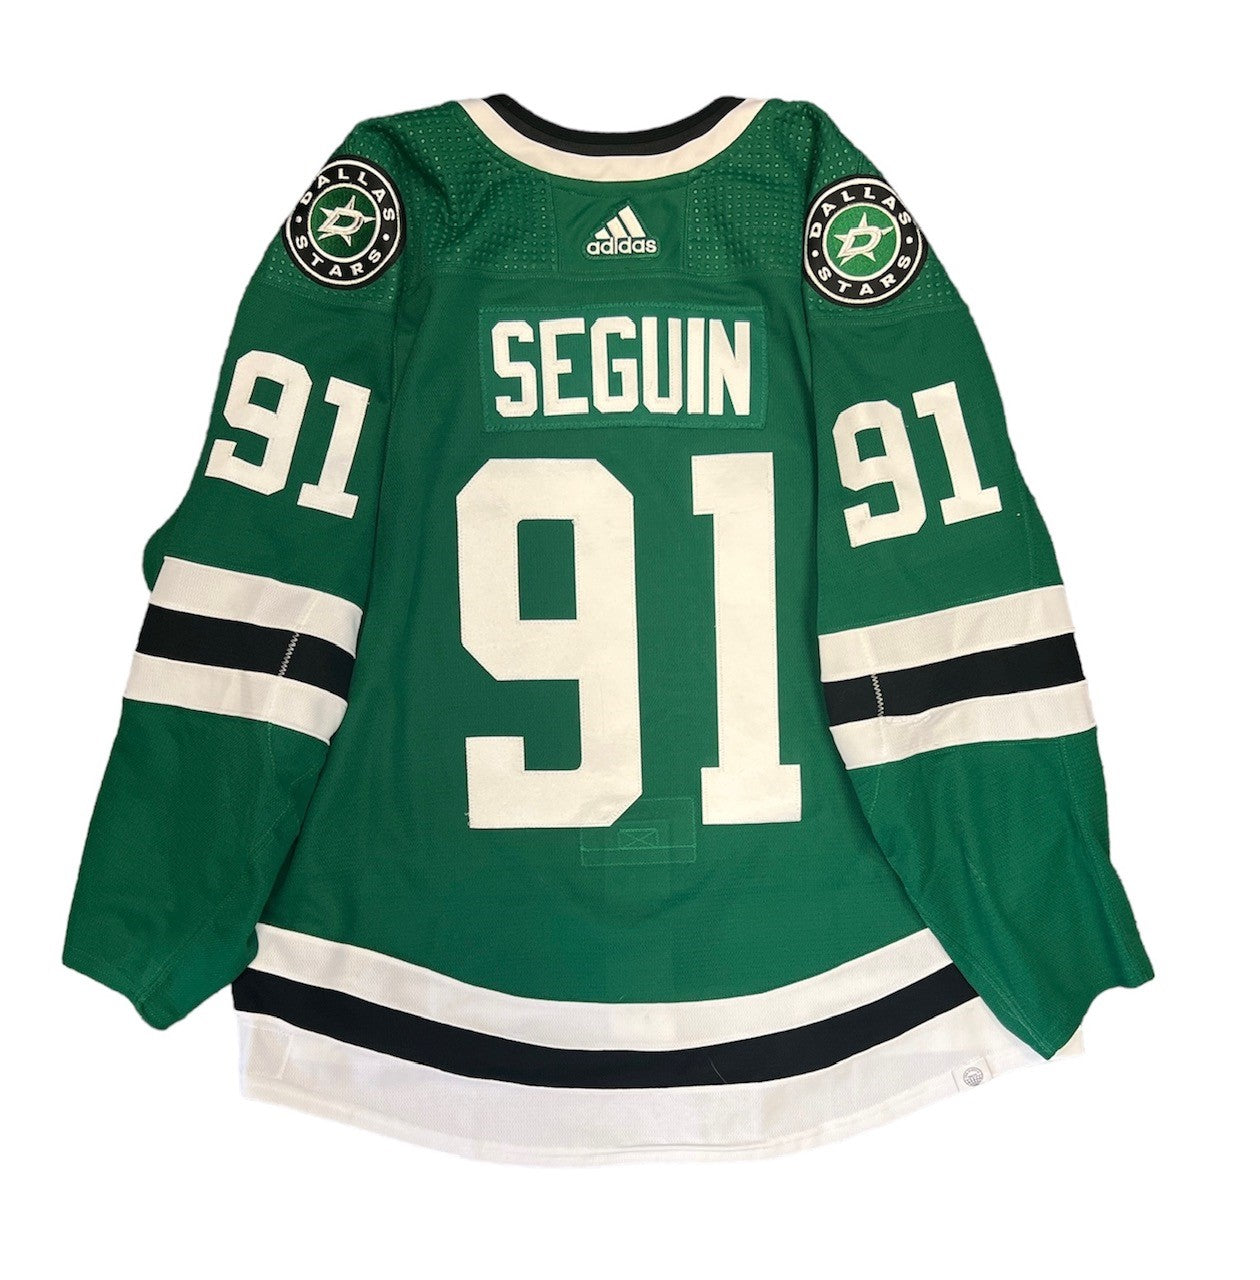 Stars Hangar - The Dallas Stars 2021-22 Blackout Jersey Auction is live.  Visit www.hangarhockey.com/collections/2021-22-game-worn-blackout-jerseys  to place your bid. The auction ends Sunday, June 5 at 8p central. DM us  with any questions